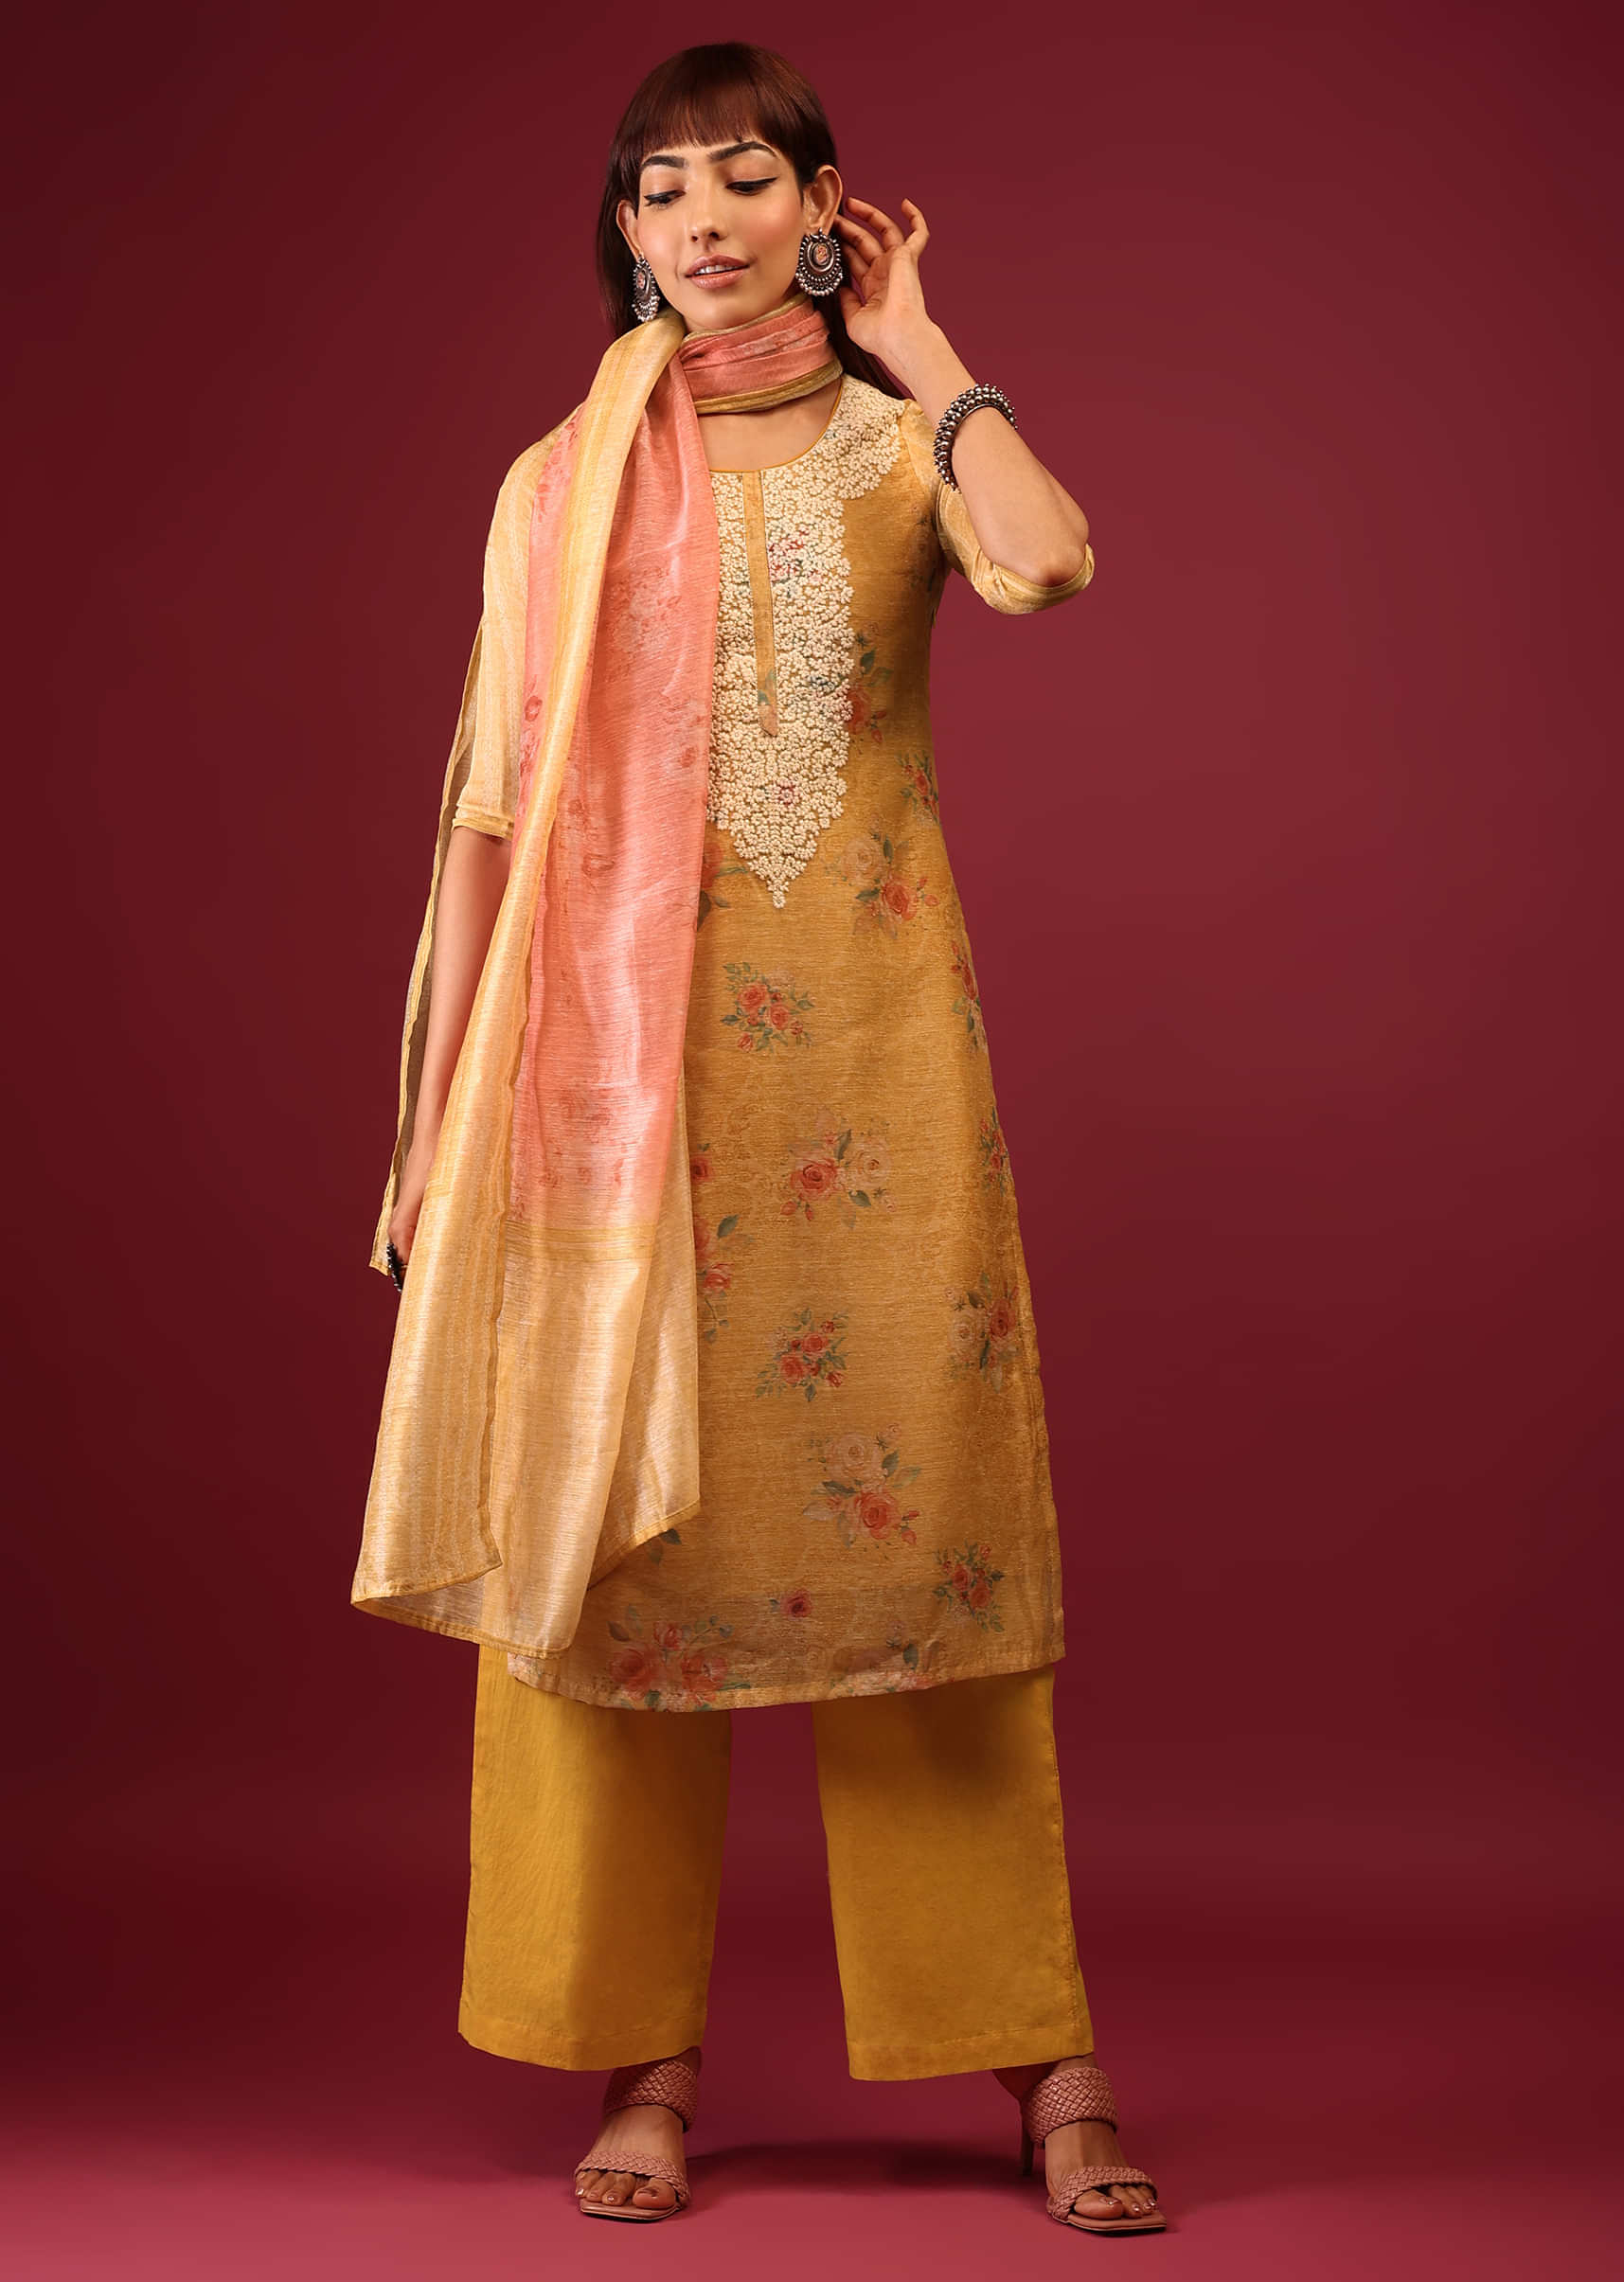 Old Gold Yellow Floral Print Palazzo Suit In U Neckline With Thread And Zari Embroidery